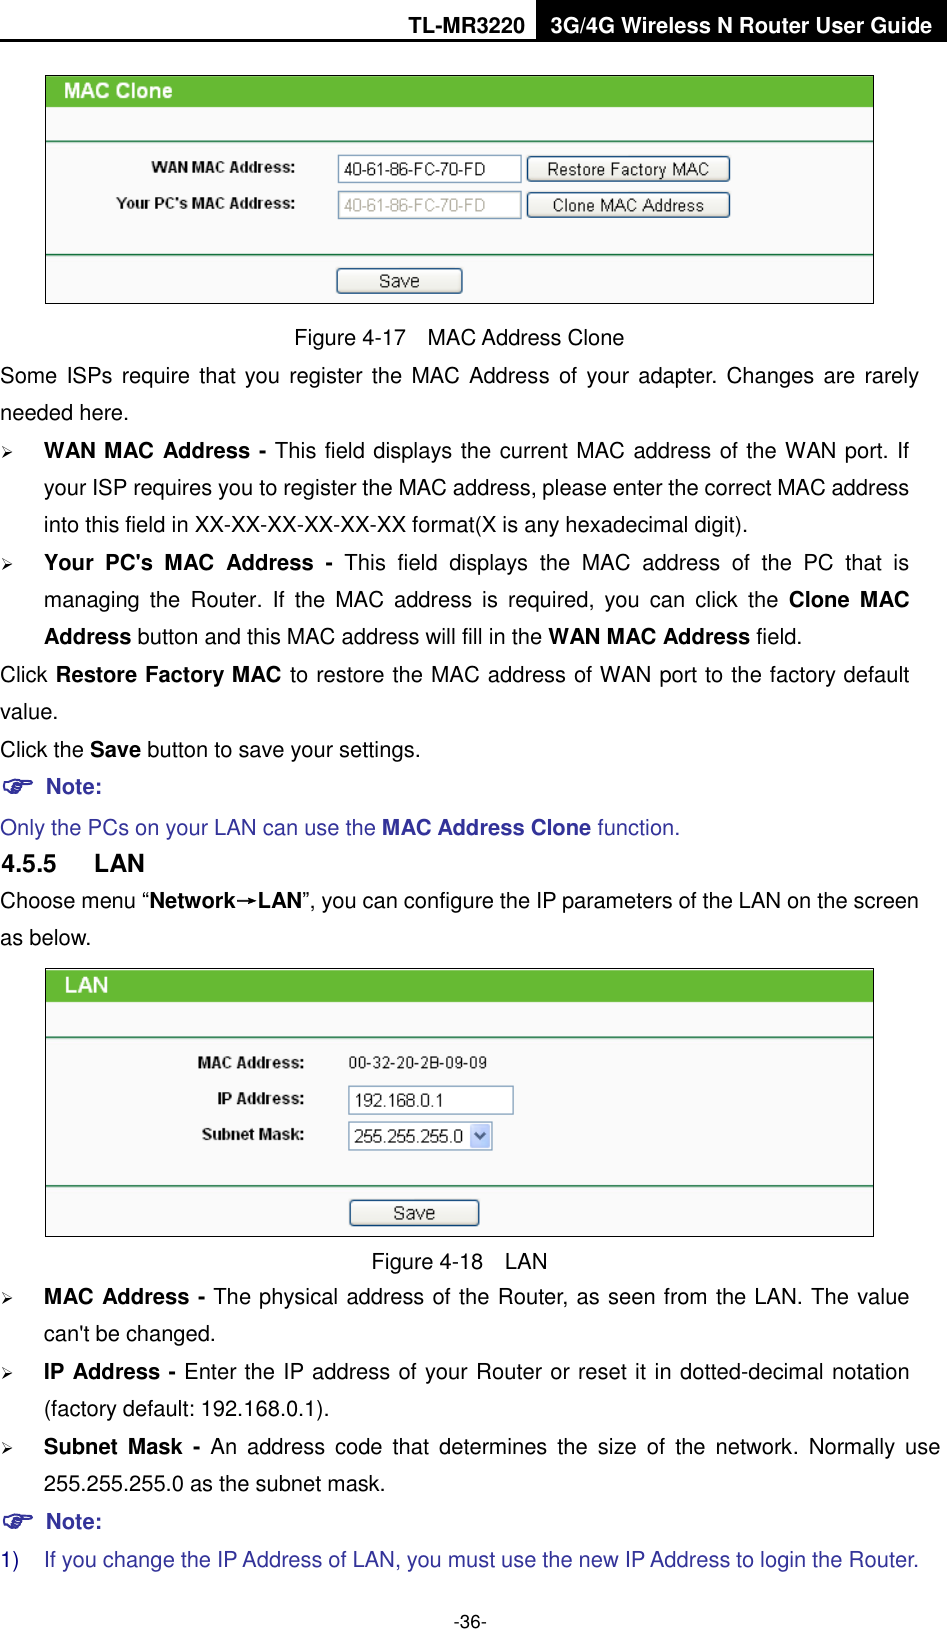 TL-MR3220 3G/4G Wireless N Router User Guide  -36-  Figure 4-17  MAC Address Clone Some ISPs require that you register the MAC Address  of your adapter. Changes are rarely needed here.  WAN MAC Address - This field displays the current MAC address of the WAN port. If your ISP requires you to register the MAC address, please enter the correct MAC address into this field in XX-XX-XX-XX-XX-XX format(X is any hexadecimal digit).    Your  PC&apos;s  MAC  Address  -  This  field  displays  the  MAC  address  of  the  PC  that  is managing  the  Router.  If  the  MAC  address  is  required,  you  can  click  the  Clone  MAC Address button and this MAC address will fill in the WAN MAC Address field. Click Restore Factory MAC to restore the MAC address of WAN port to the factory default value. Click the Save button to save your settings.  Note:   Only the PCs on your LAN can use the MAC Address Clone function. 4.5.5  LAN Choose menu “Network→LAN”, you can configure the IP parameters of the LAN on the screen as below.  Figure 4-18  LAN  MAC Address - The physical address of the Router, as seen from the LAN. The value can&apos;t be changed.  IP Address - Enter the IP address of your Router or reset it in dotted-decimal notation (factory default: 192.168.0.1).  Subnet Mask  -  An  address  code  that  determines  the  size  of  the  network.  Normally  use 255.255.255.0 as the subnet mask.    Note: 1) If you change the IP Address of LAN, you must use the new IP Address to login the Router.   